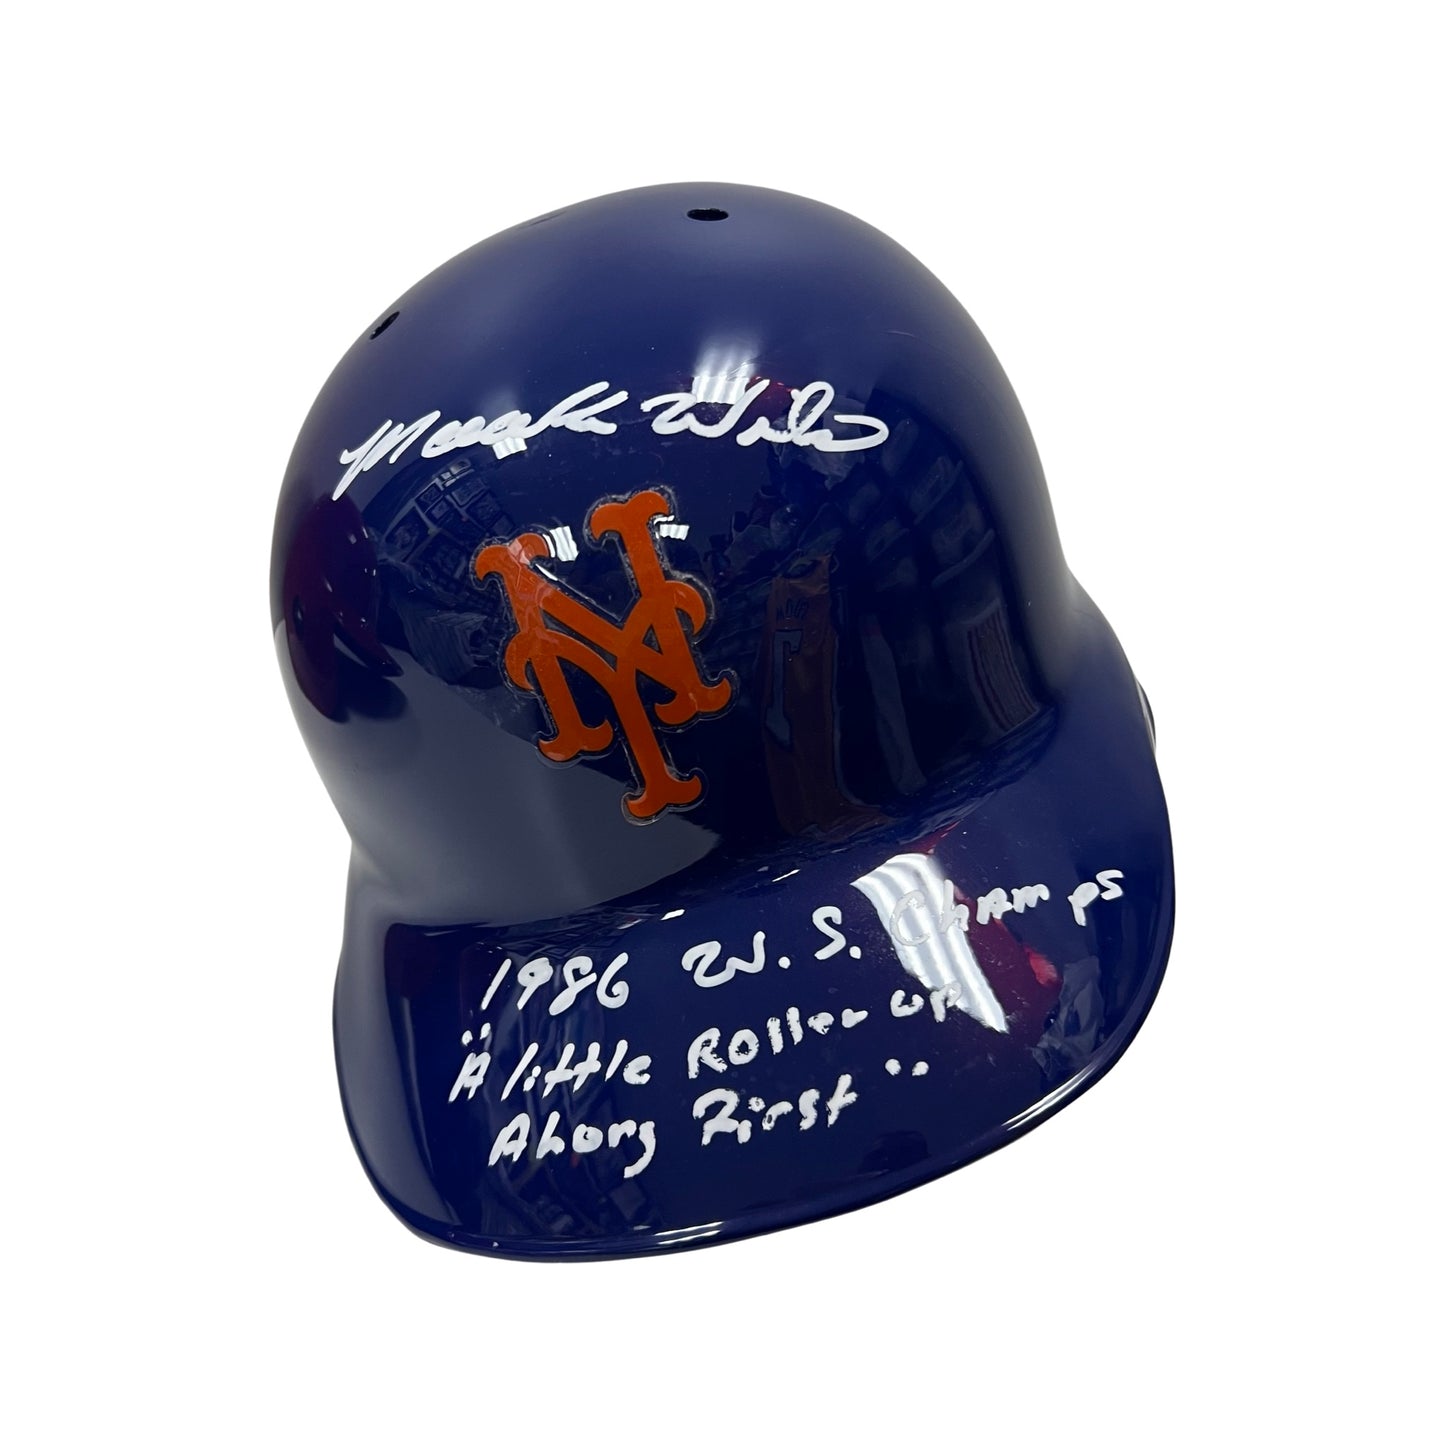 Mookie Wilson Autographed New York Mets Batting Helmet “1986 WS Champs, A Little Roller Up Along First” Inscriptions Steiner CX